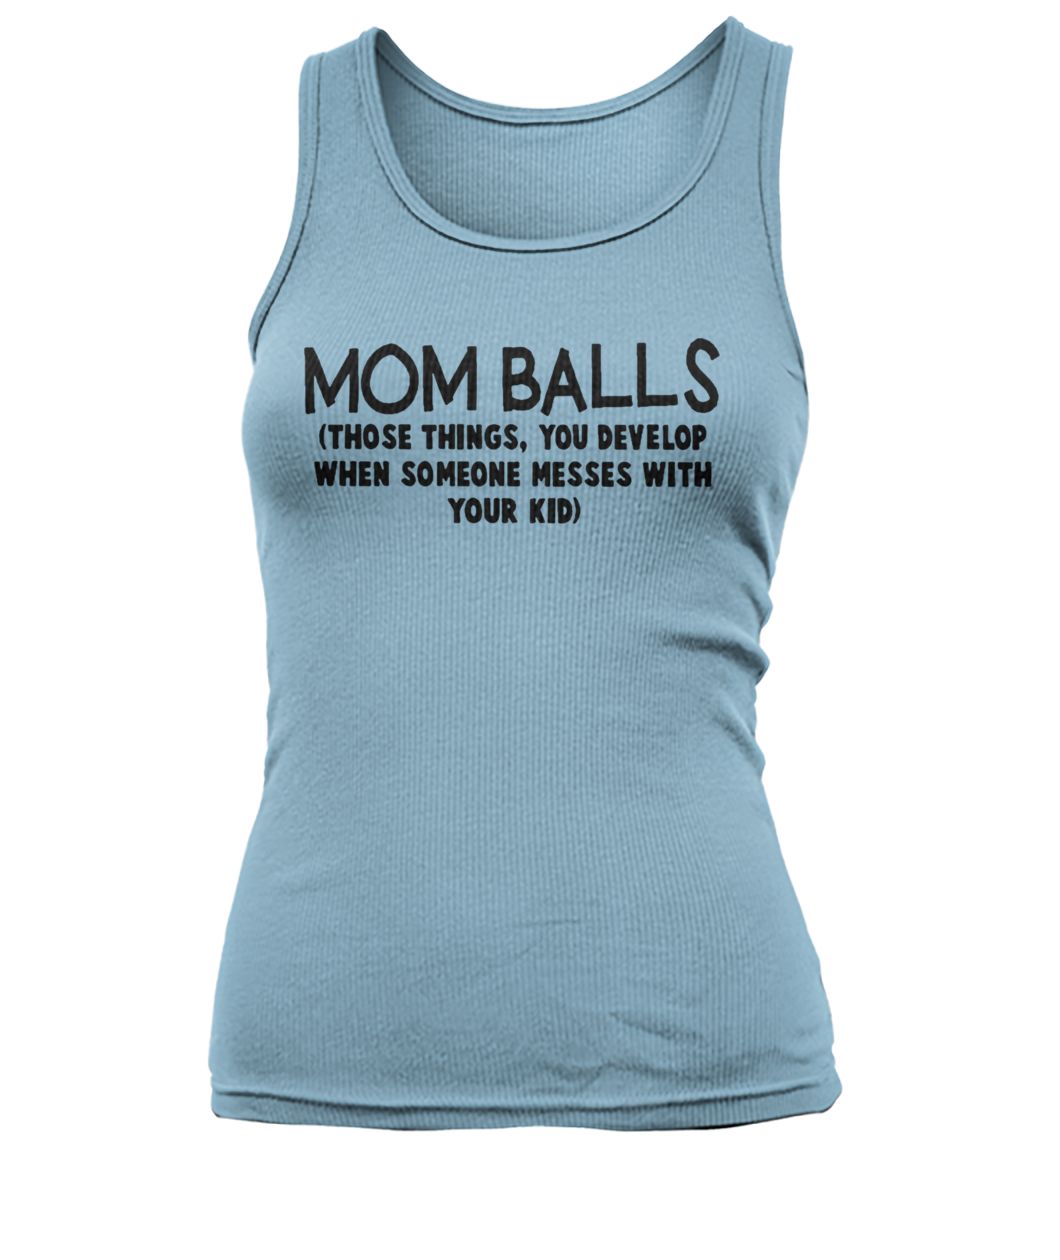 Mom balls those things you develop when someone messes with your kid women's tank top